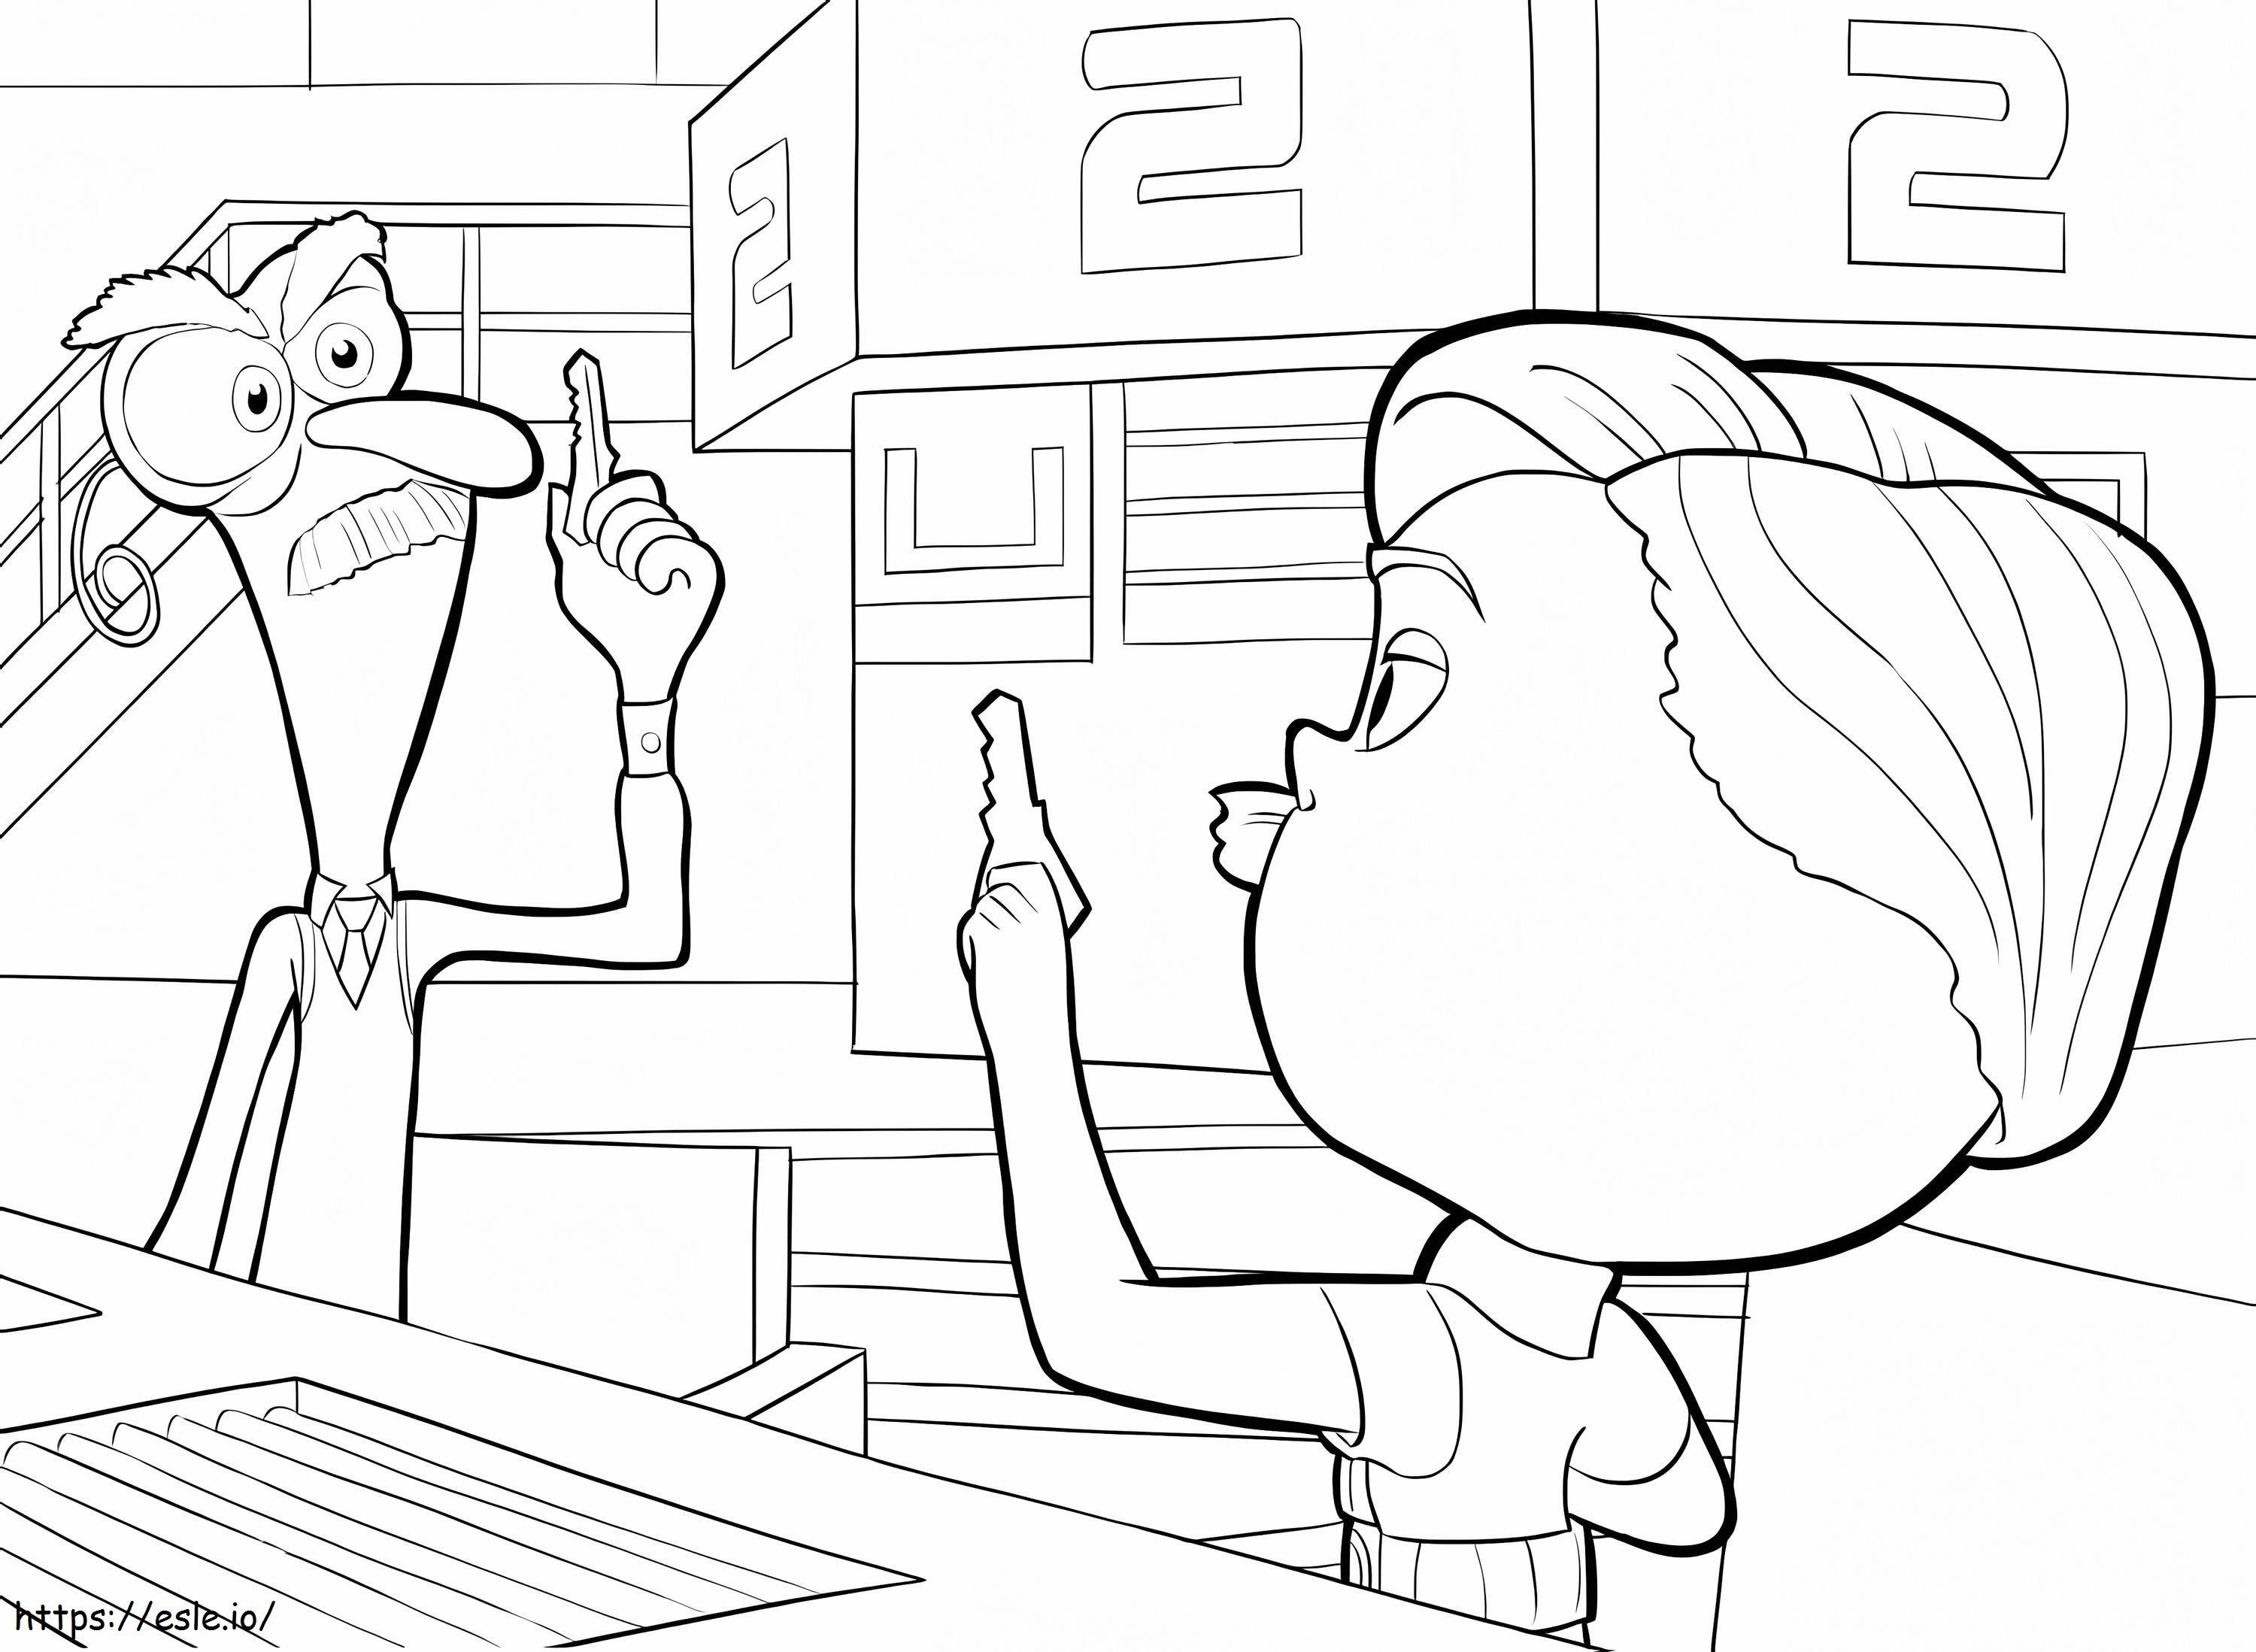 Inside Out Characters 3 coloring page